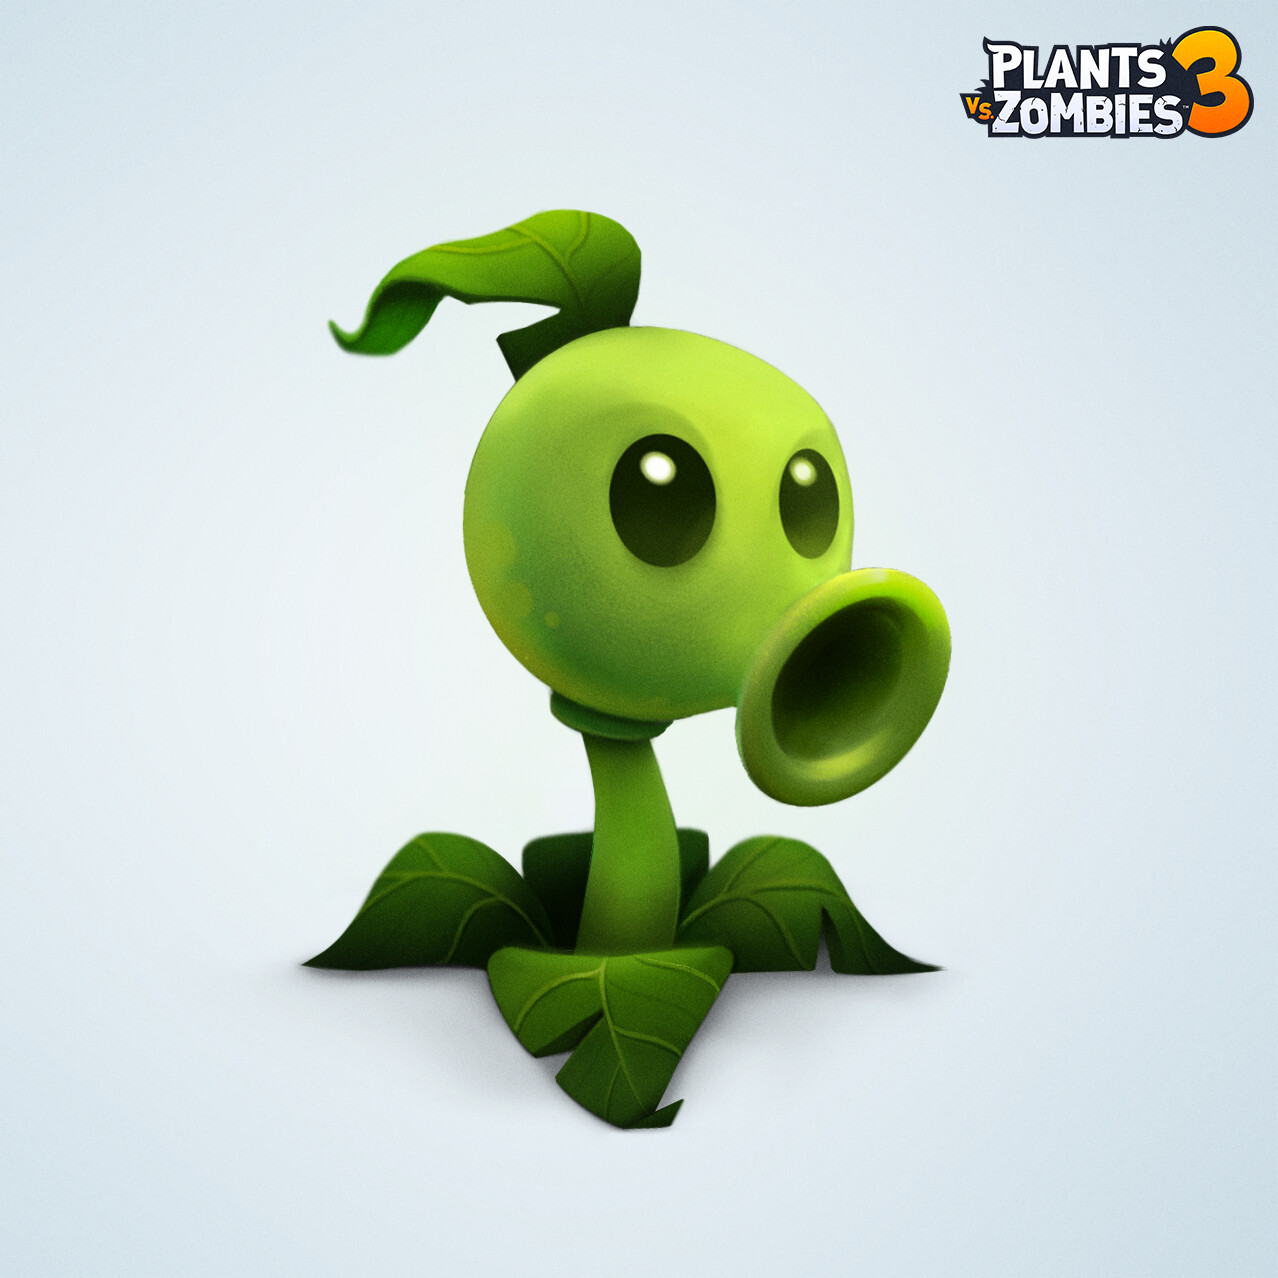 Peashooter concept I painted. 